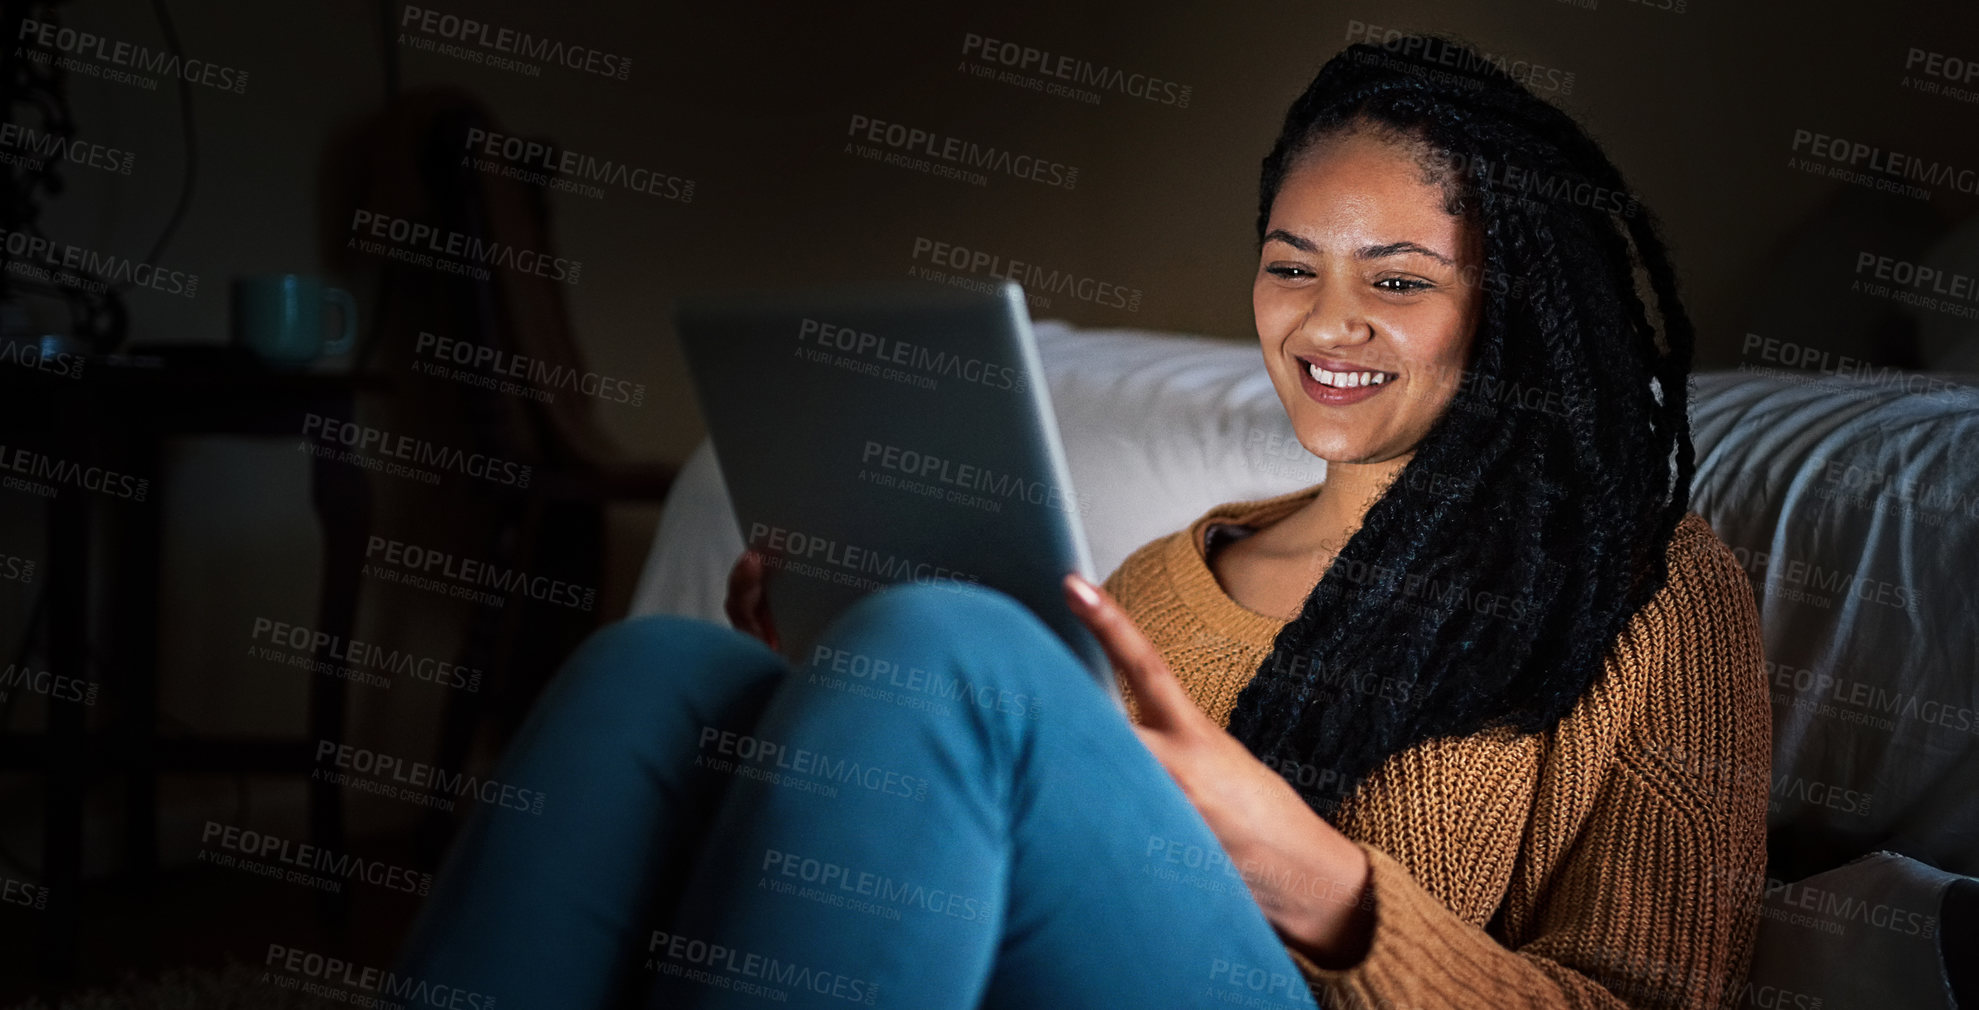 Buy stock photo Shot of a relaxed young woman using a digital tablet during the evening at home